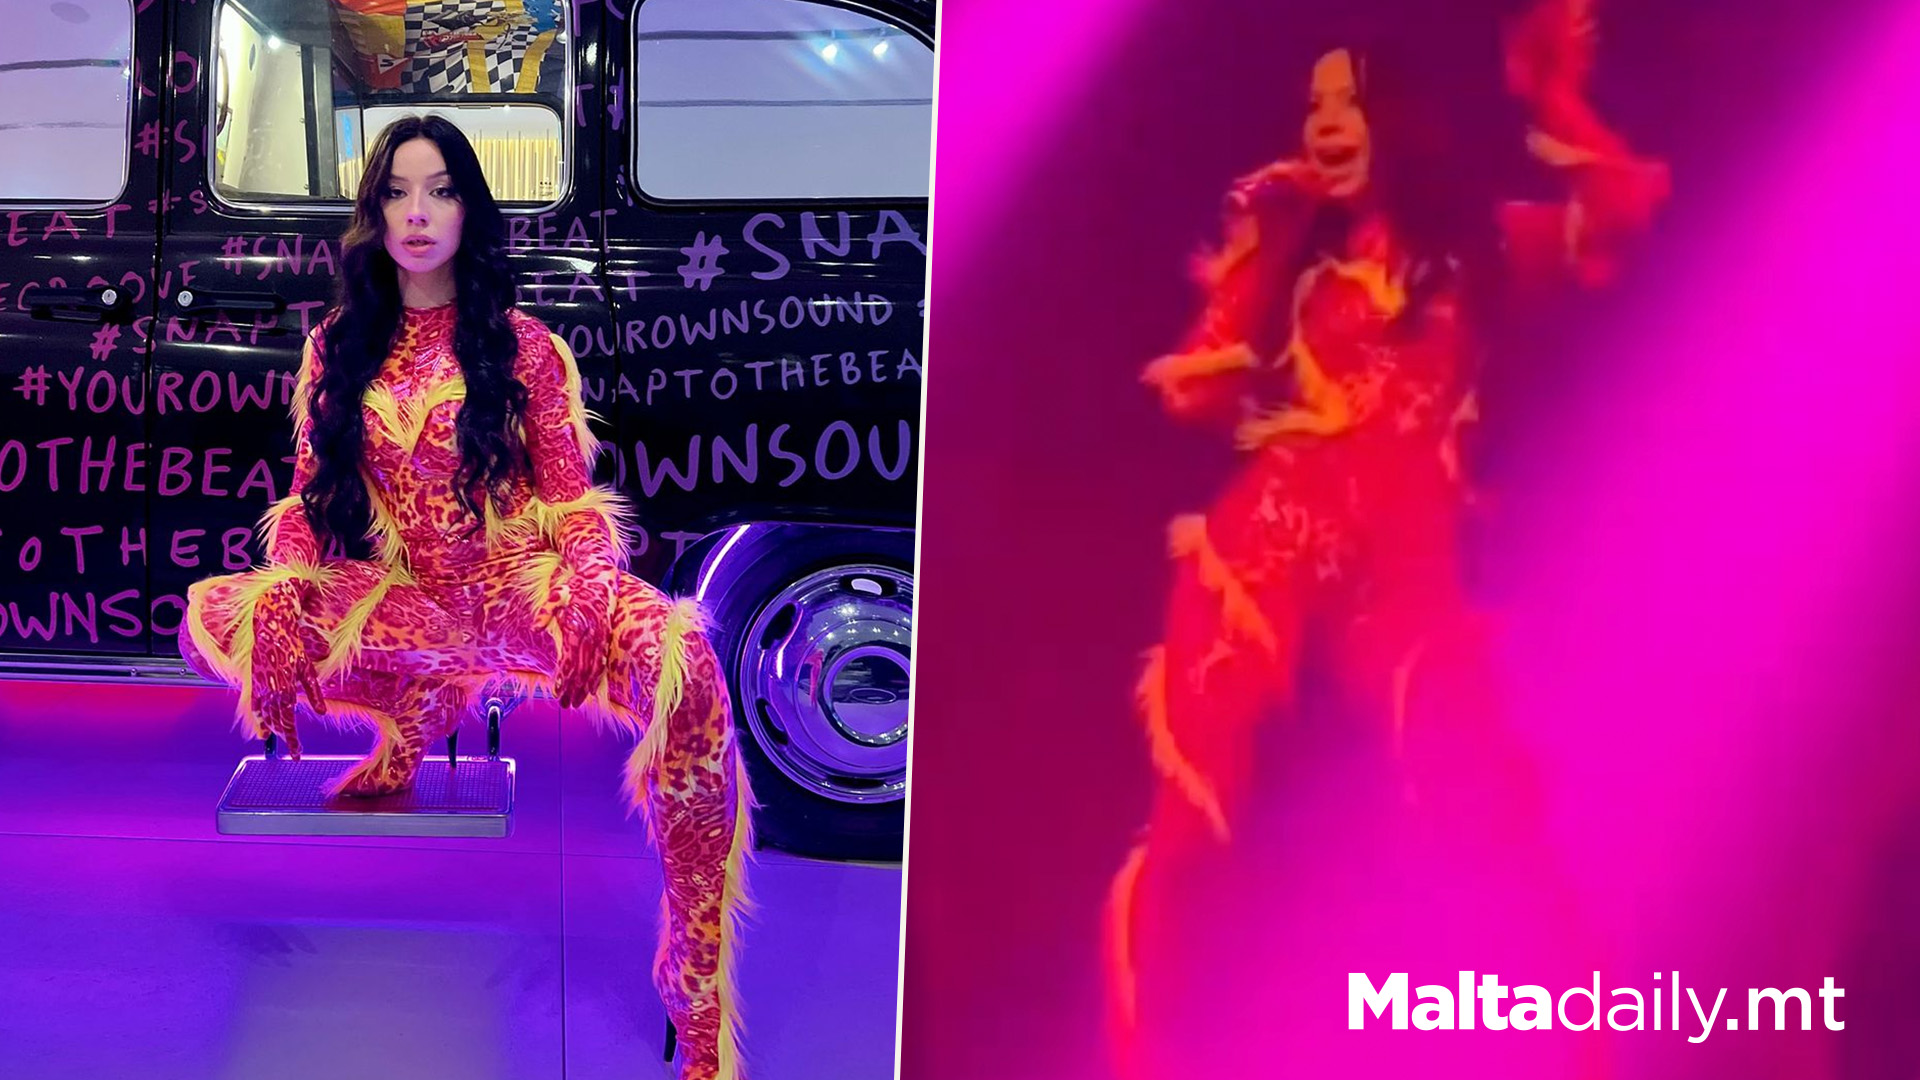 Sarah Bonnici With Fiery Outfit & Performance In UK